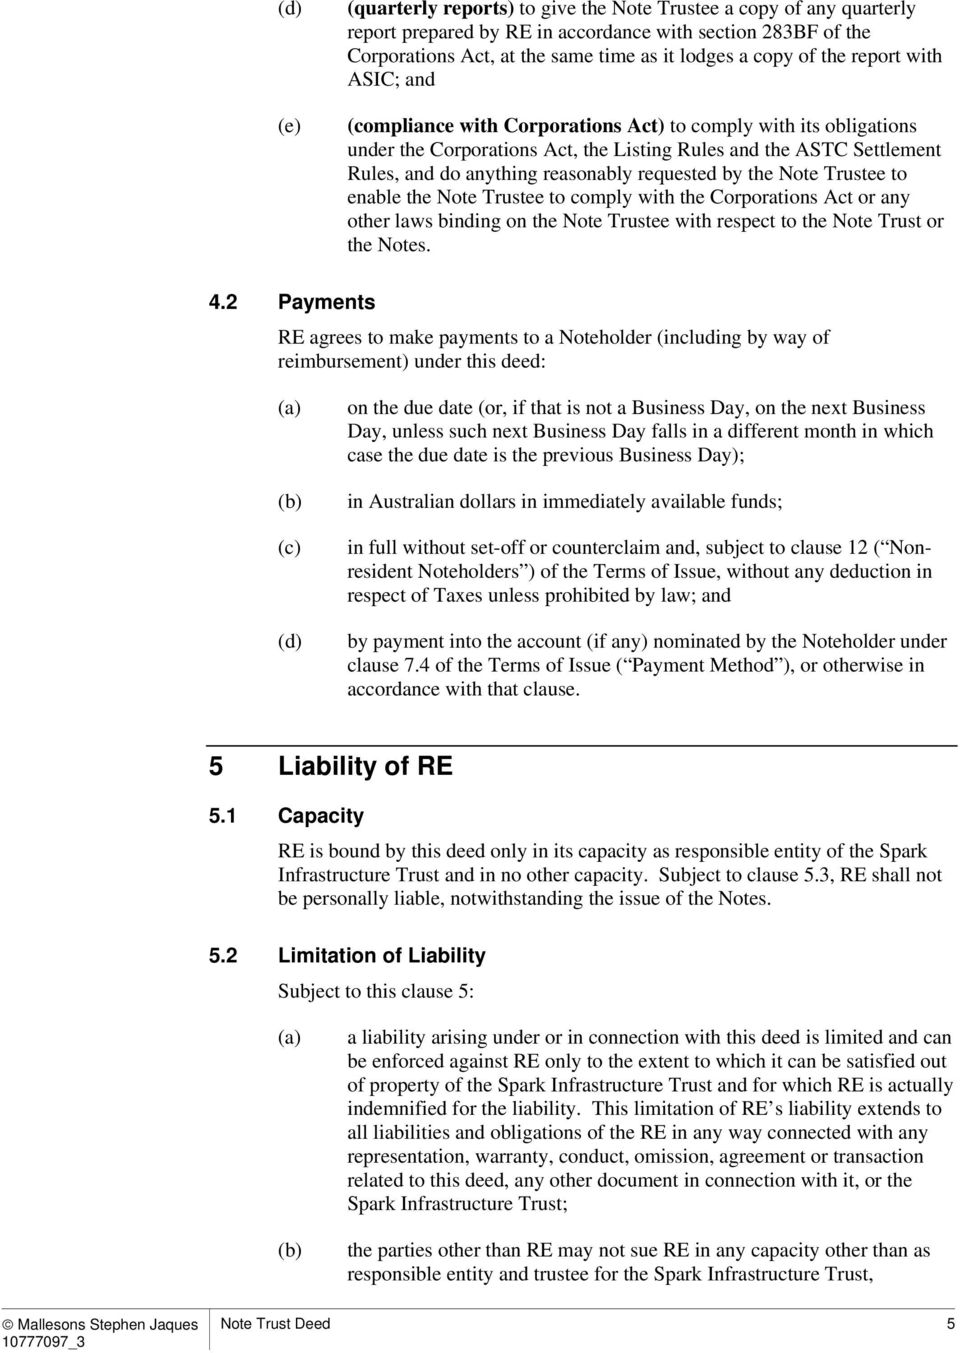 requested by the Note Trustee to enable the Note Trustee to comply with the Corporations Act or any other laws binding on the Note Trustee with respect to the Note Trust or the Notes. 4.